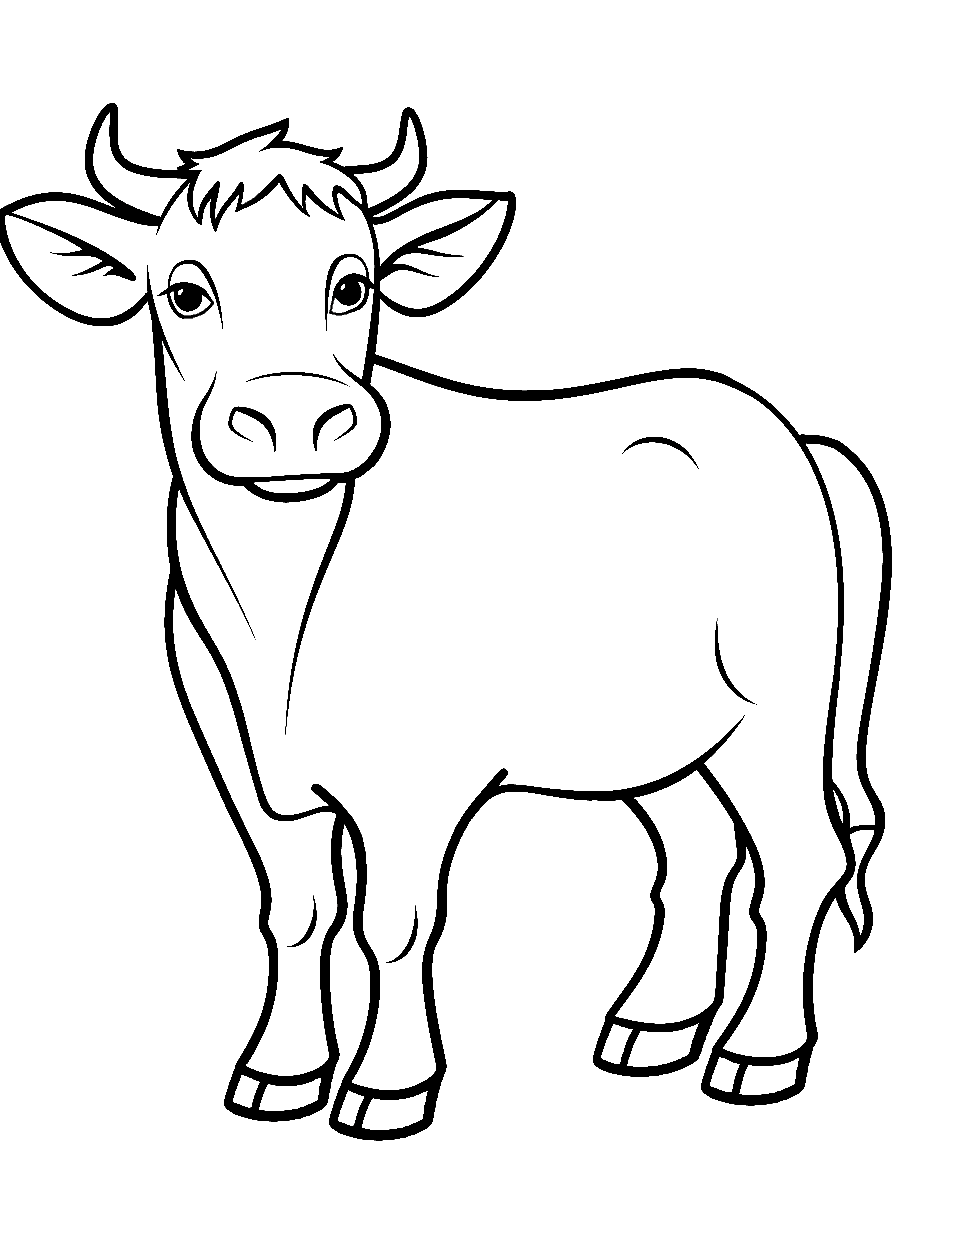 Preschooler’s Simple Bovine Coloring Page - A straightforward, uncomplicated cow design, easy for tiny hands to color.